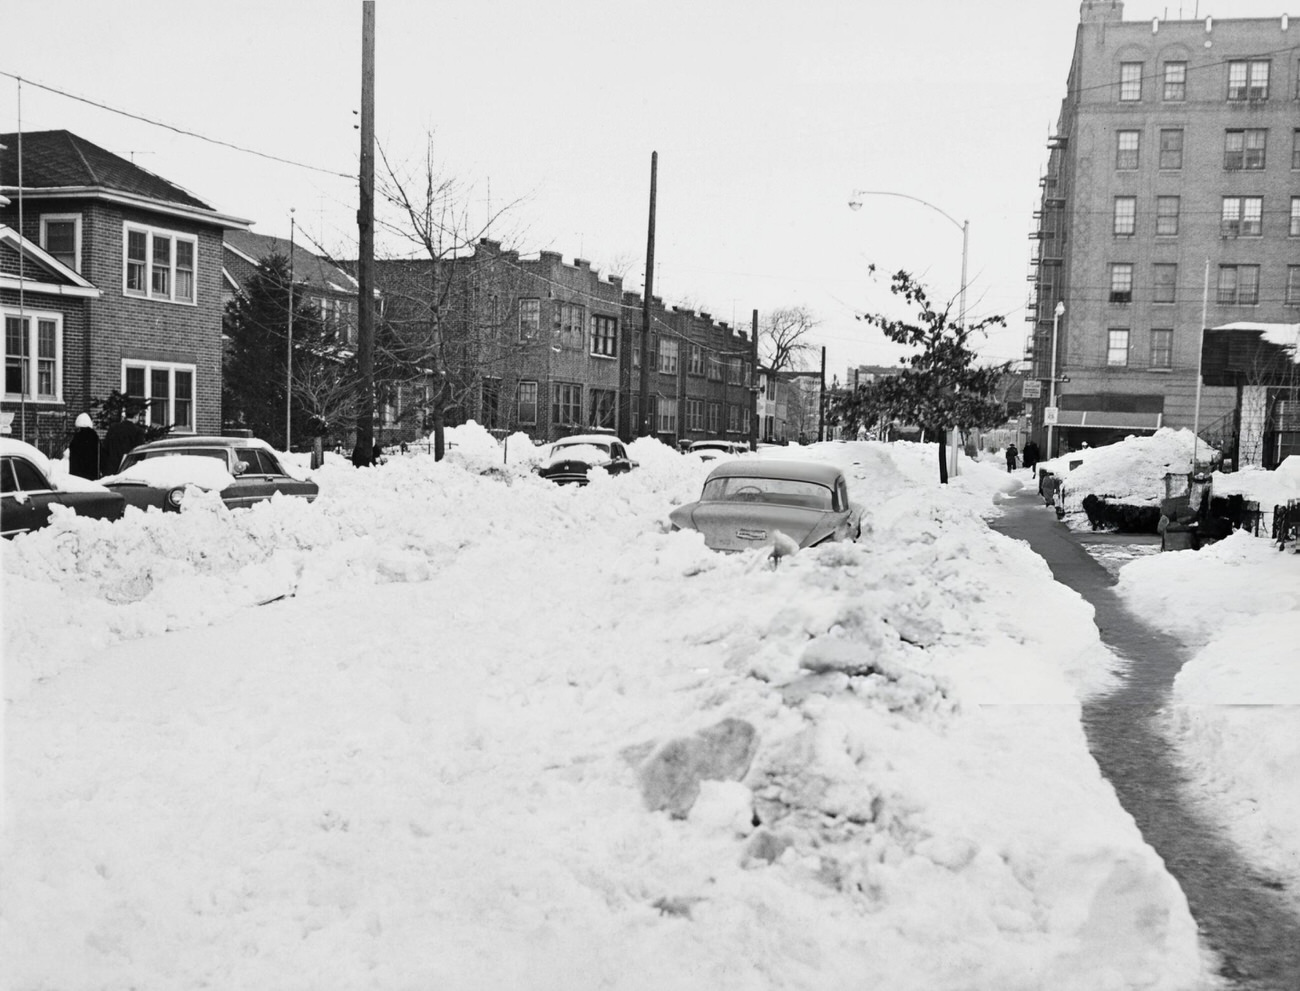 Mounds Of Snow Partly Bury Cars On An Unplowed Street In The Bronx, During A Blizzard In 1961